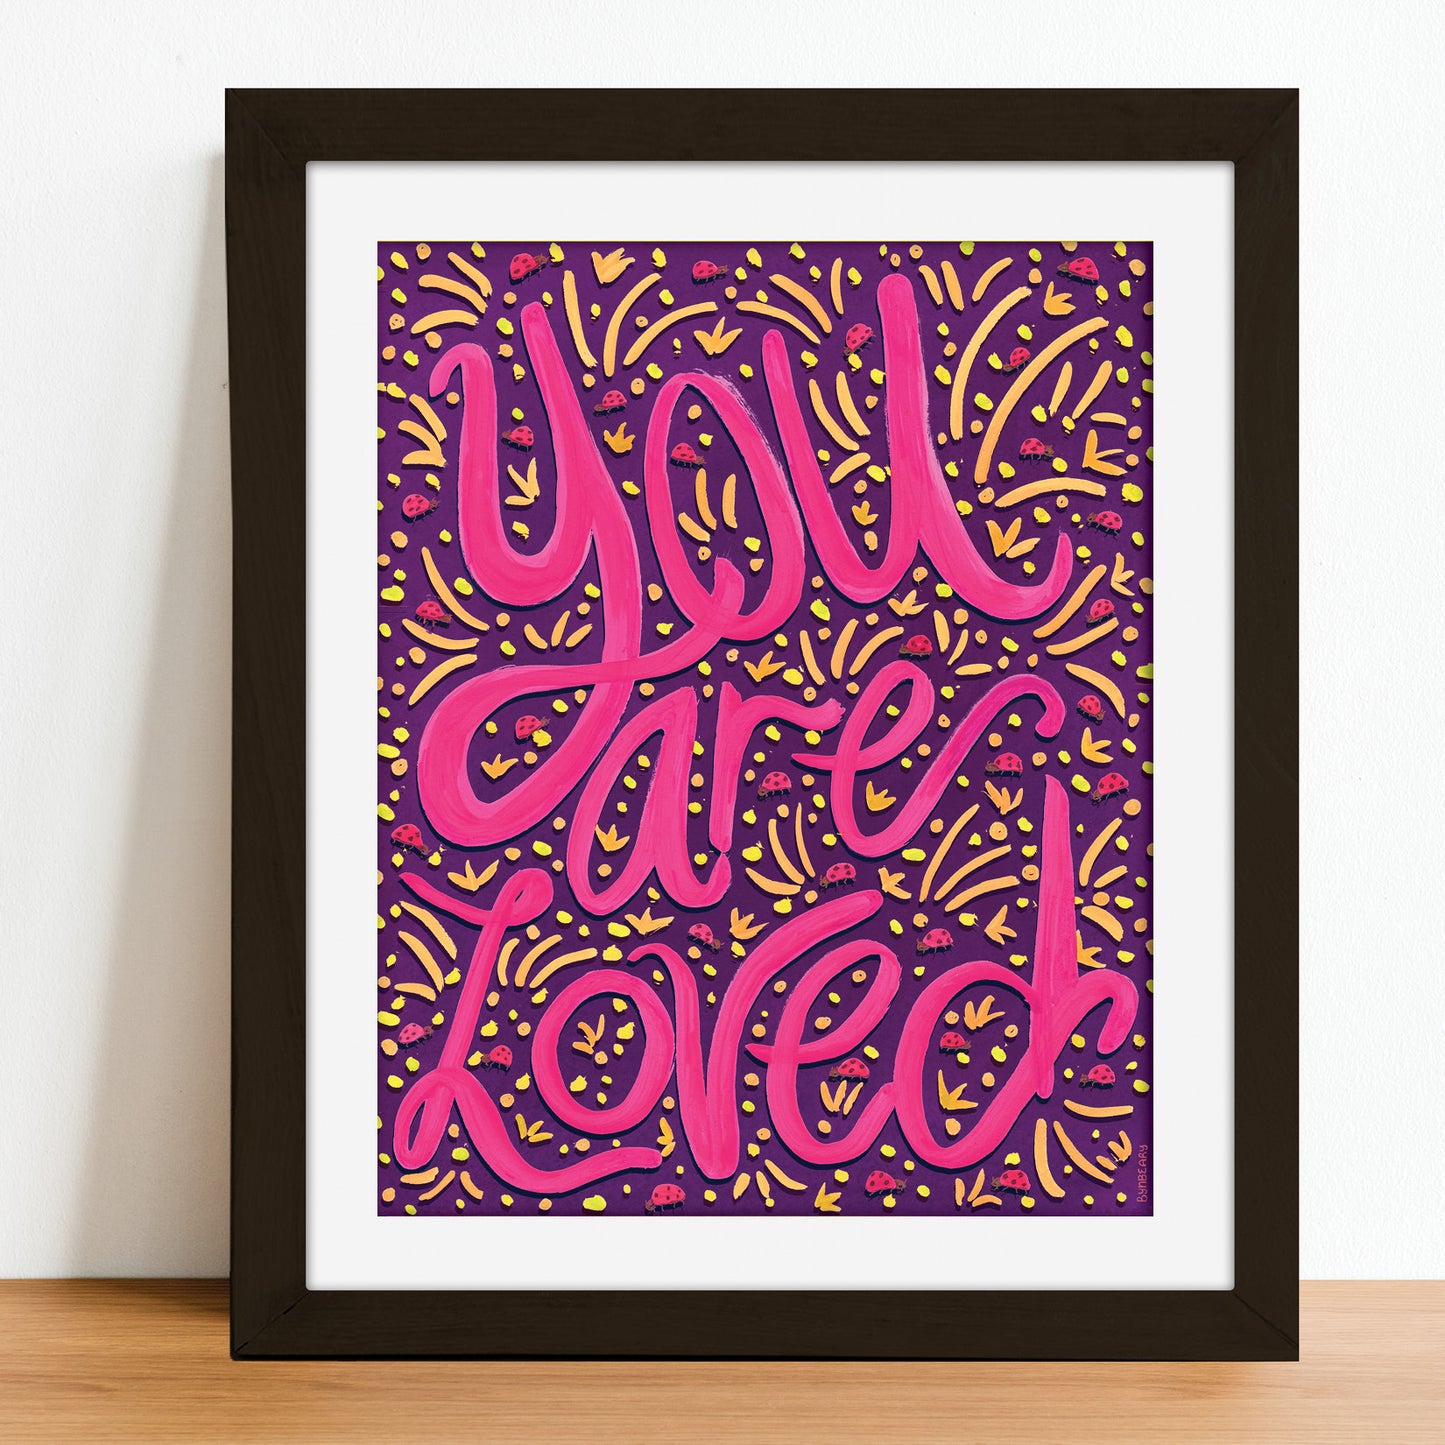 You Are Loved - Giclée Art Print